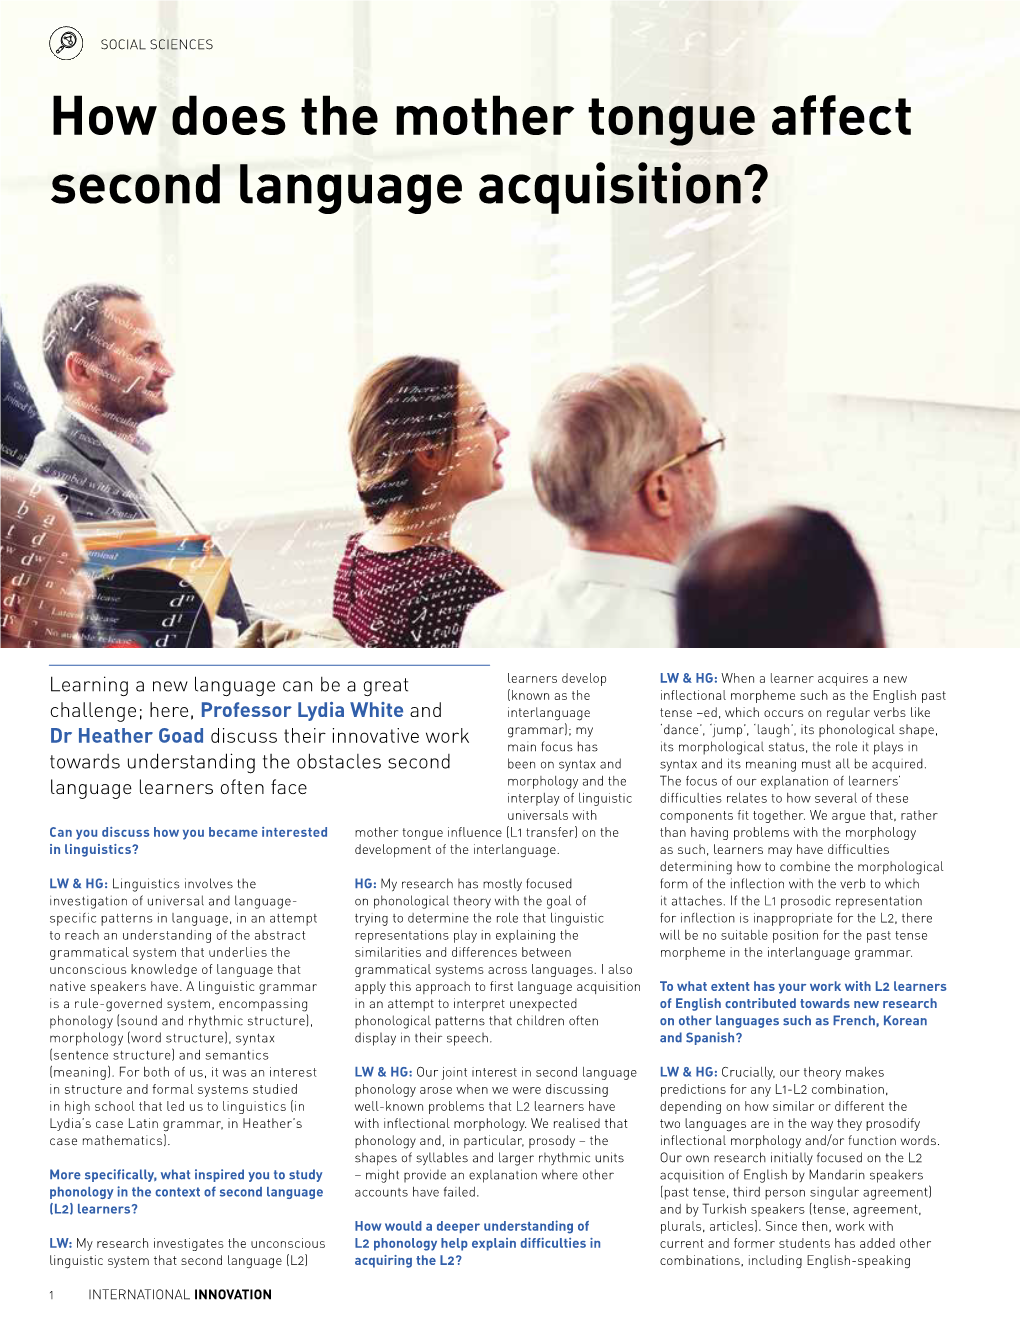 How Does the Mother Tongue Affect Second Language Acquisition?